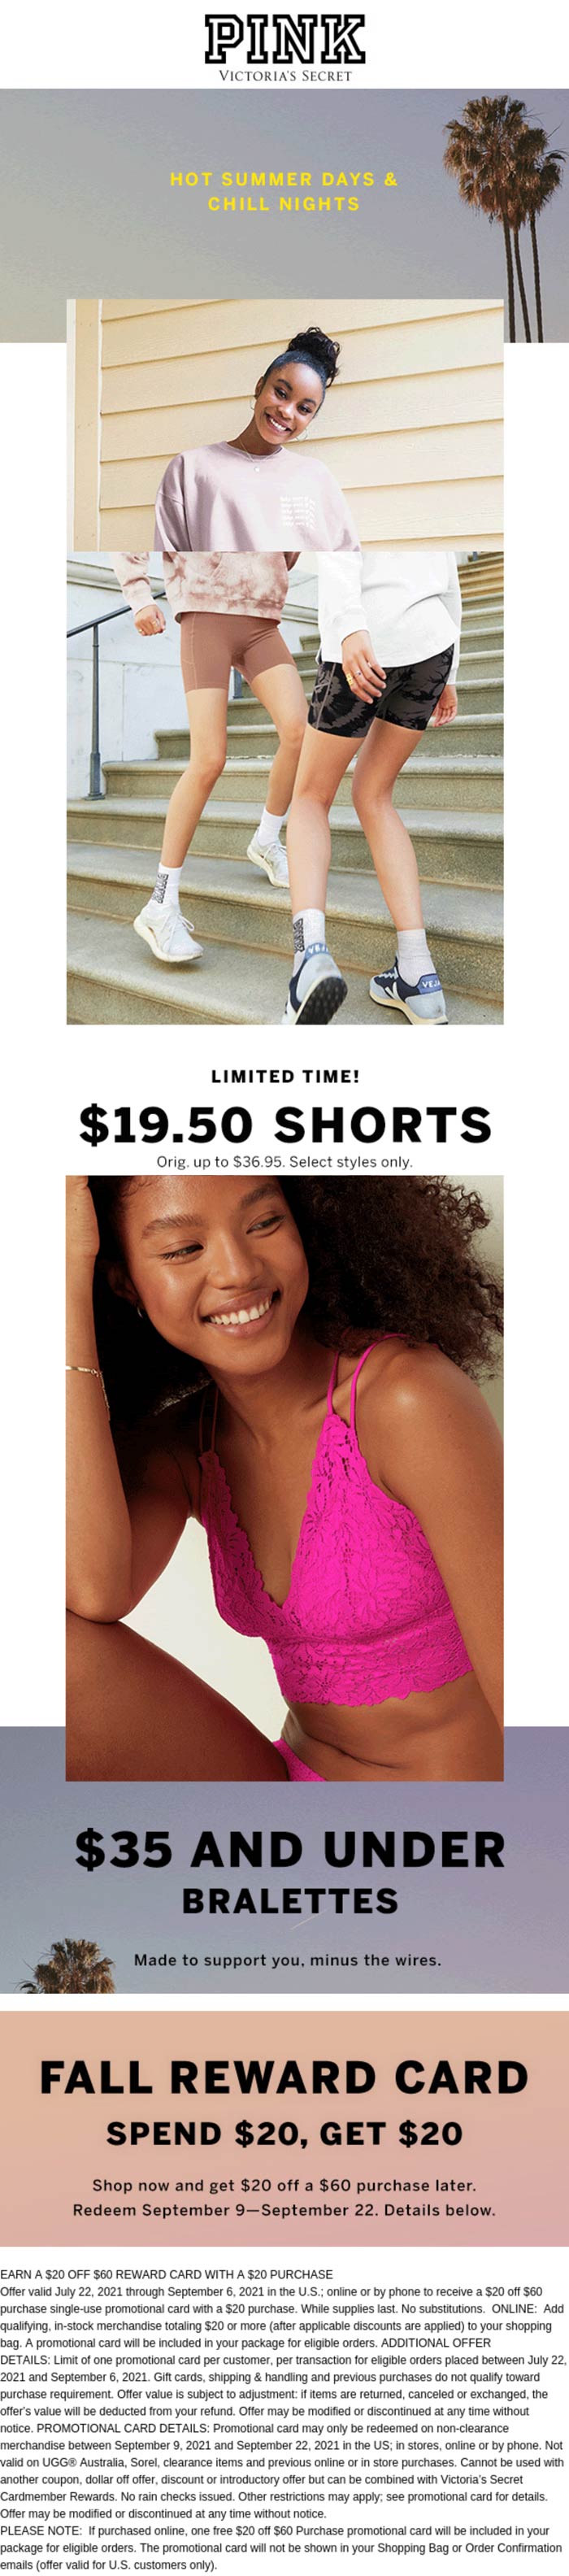 PINK stores Coupon  $20 off $60 reward card with $20 spent at PINK #pink 